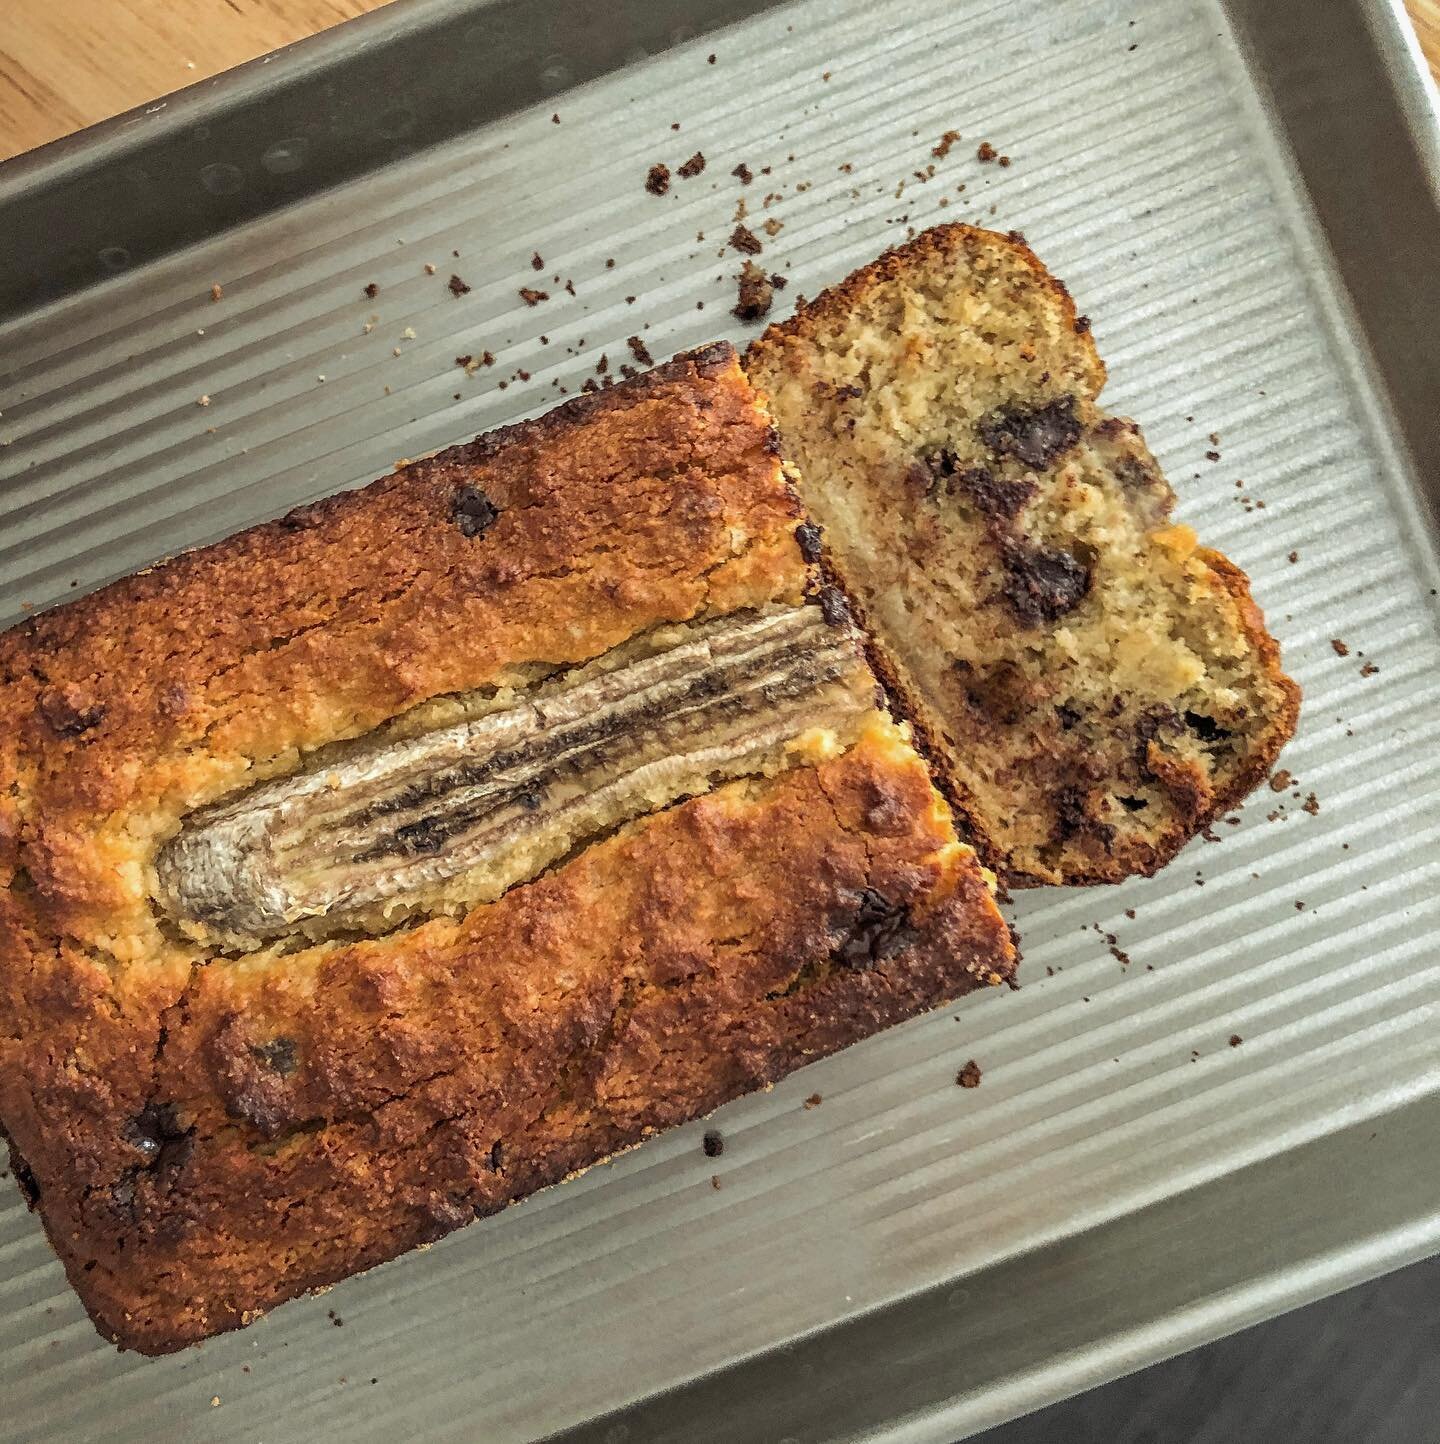 Here&rsquo;s some chocolate chip banana bread for you to look at and think &ldquo;mmm I want some.&rdquo; You&rsquo;re welcome. 
.
.
.
#doritjaffe #bananabread #baking #yummy #chocolate #deliciousfood